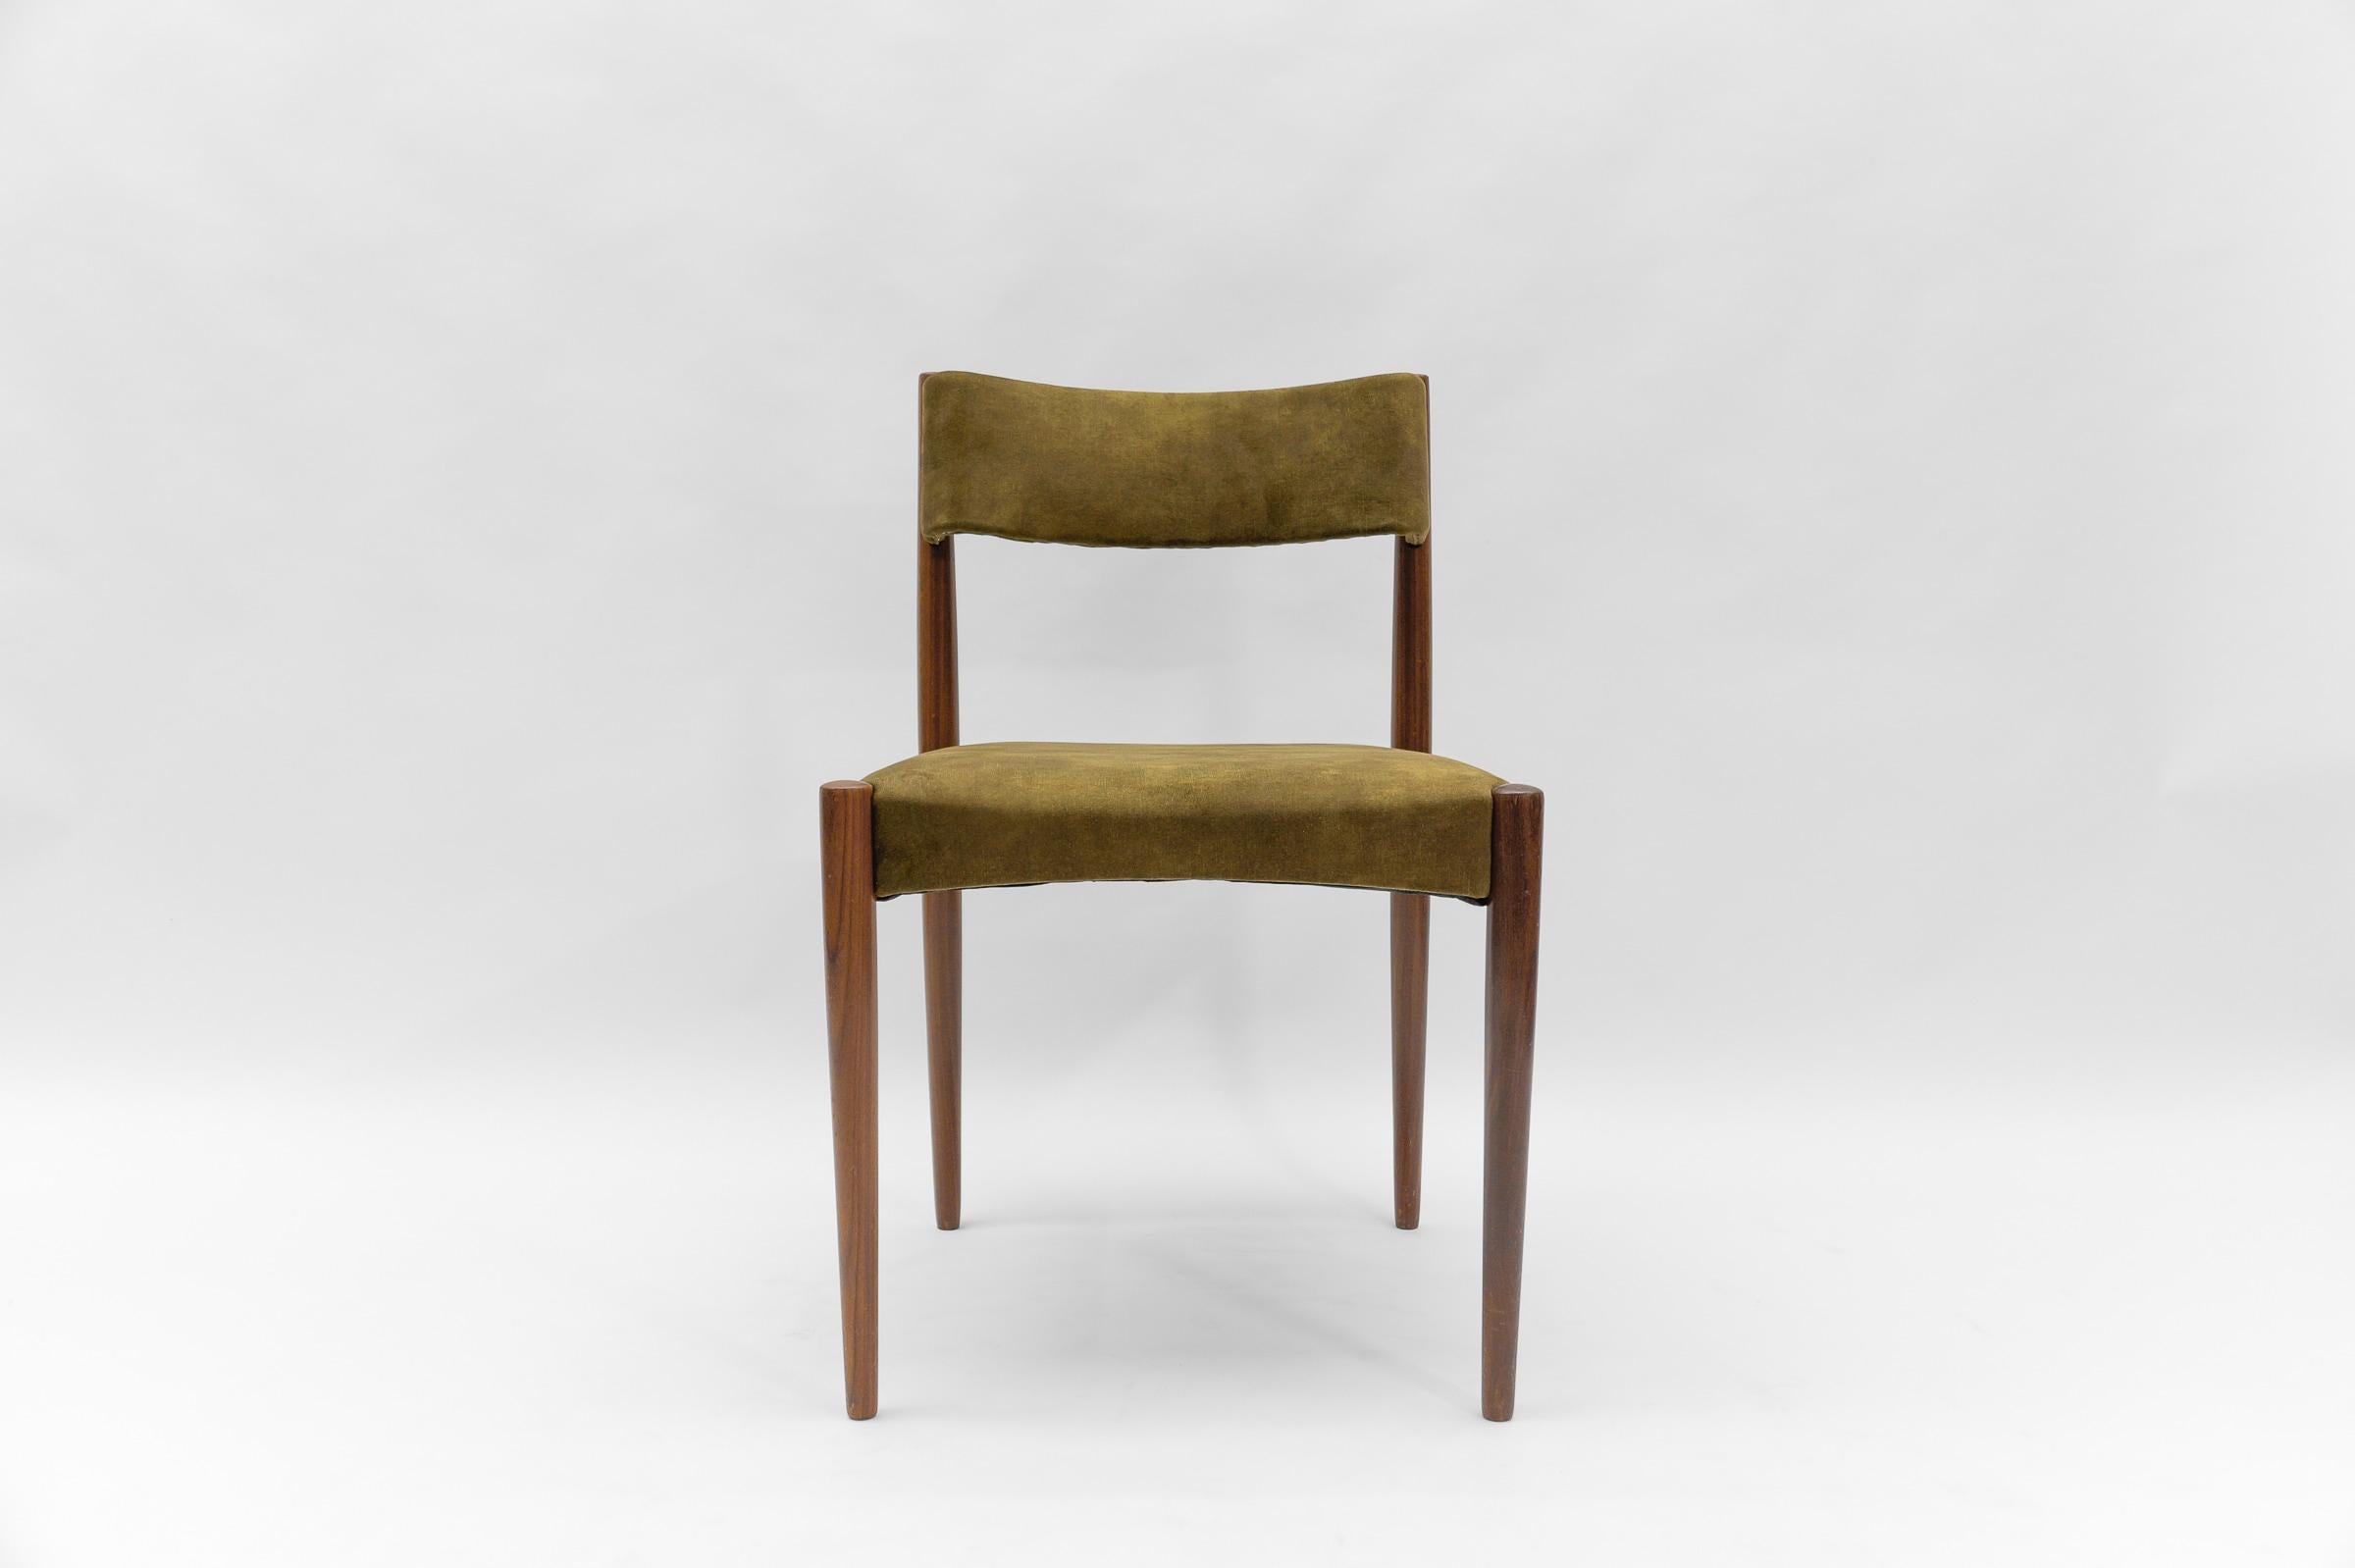 Four Wooden Scandinavian Dining Room Chairs, 1960s For Sale 2